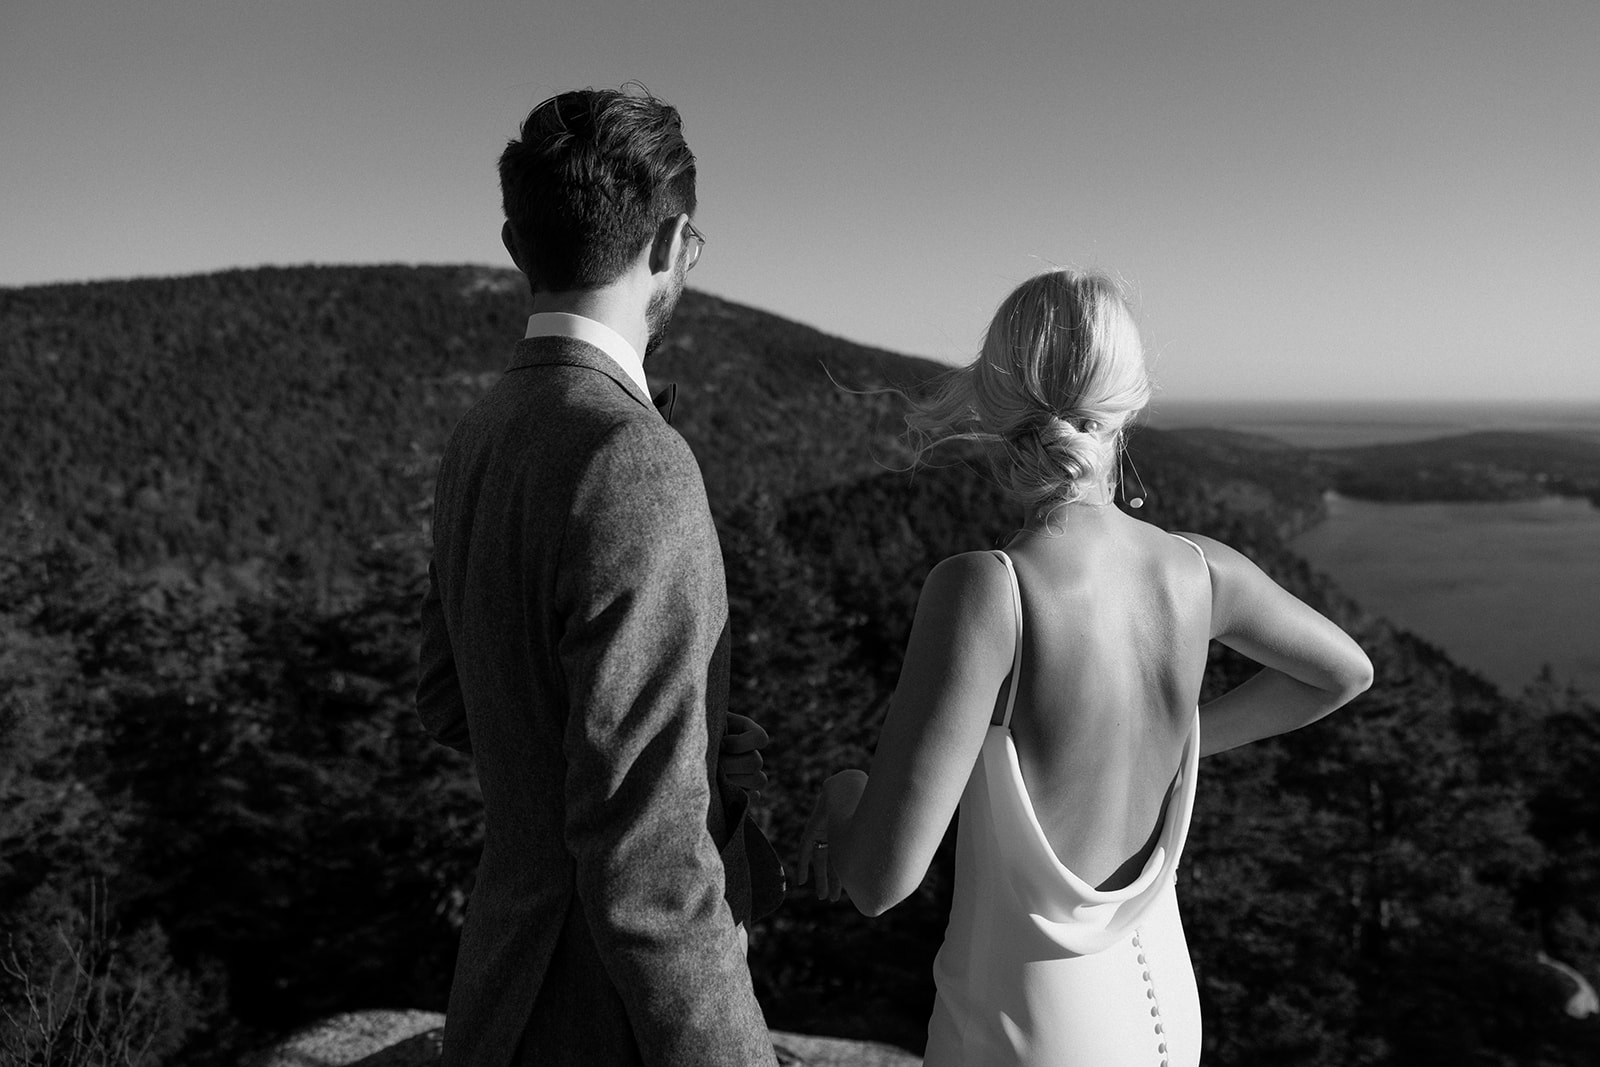 Bubble rock elopement and vows in the Fall. Acadia national park elopement and microwedding.